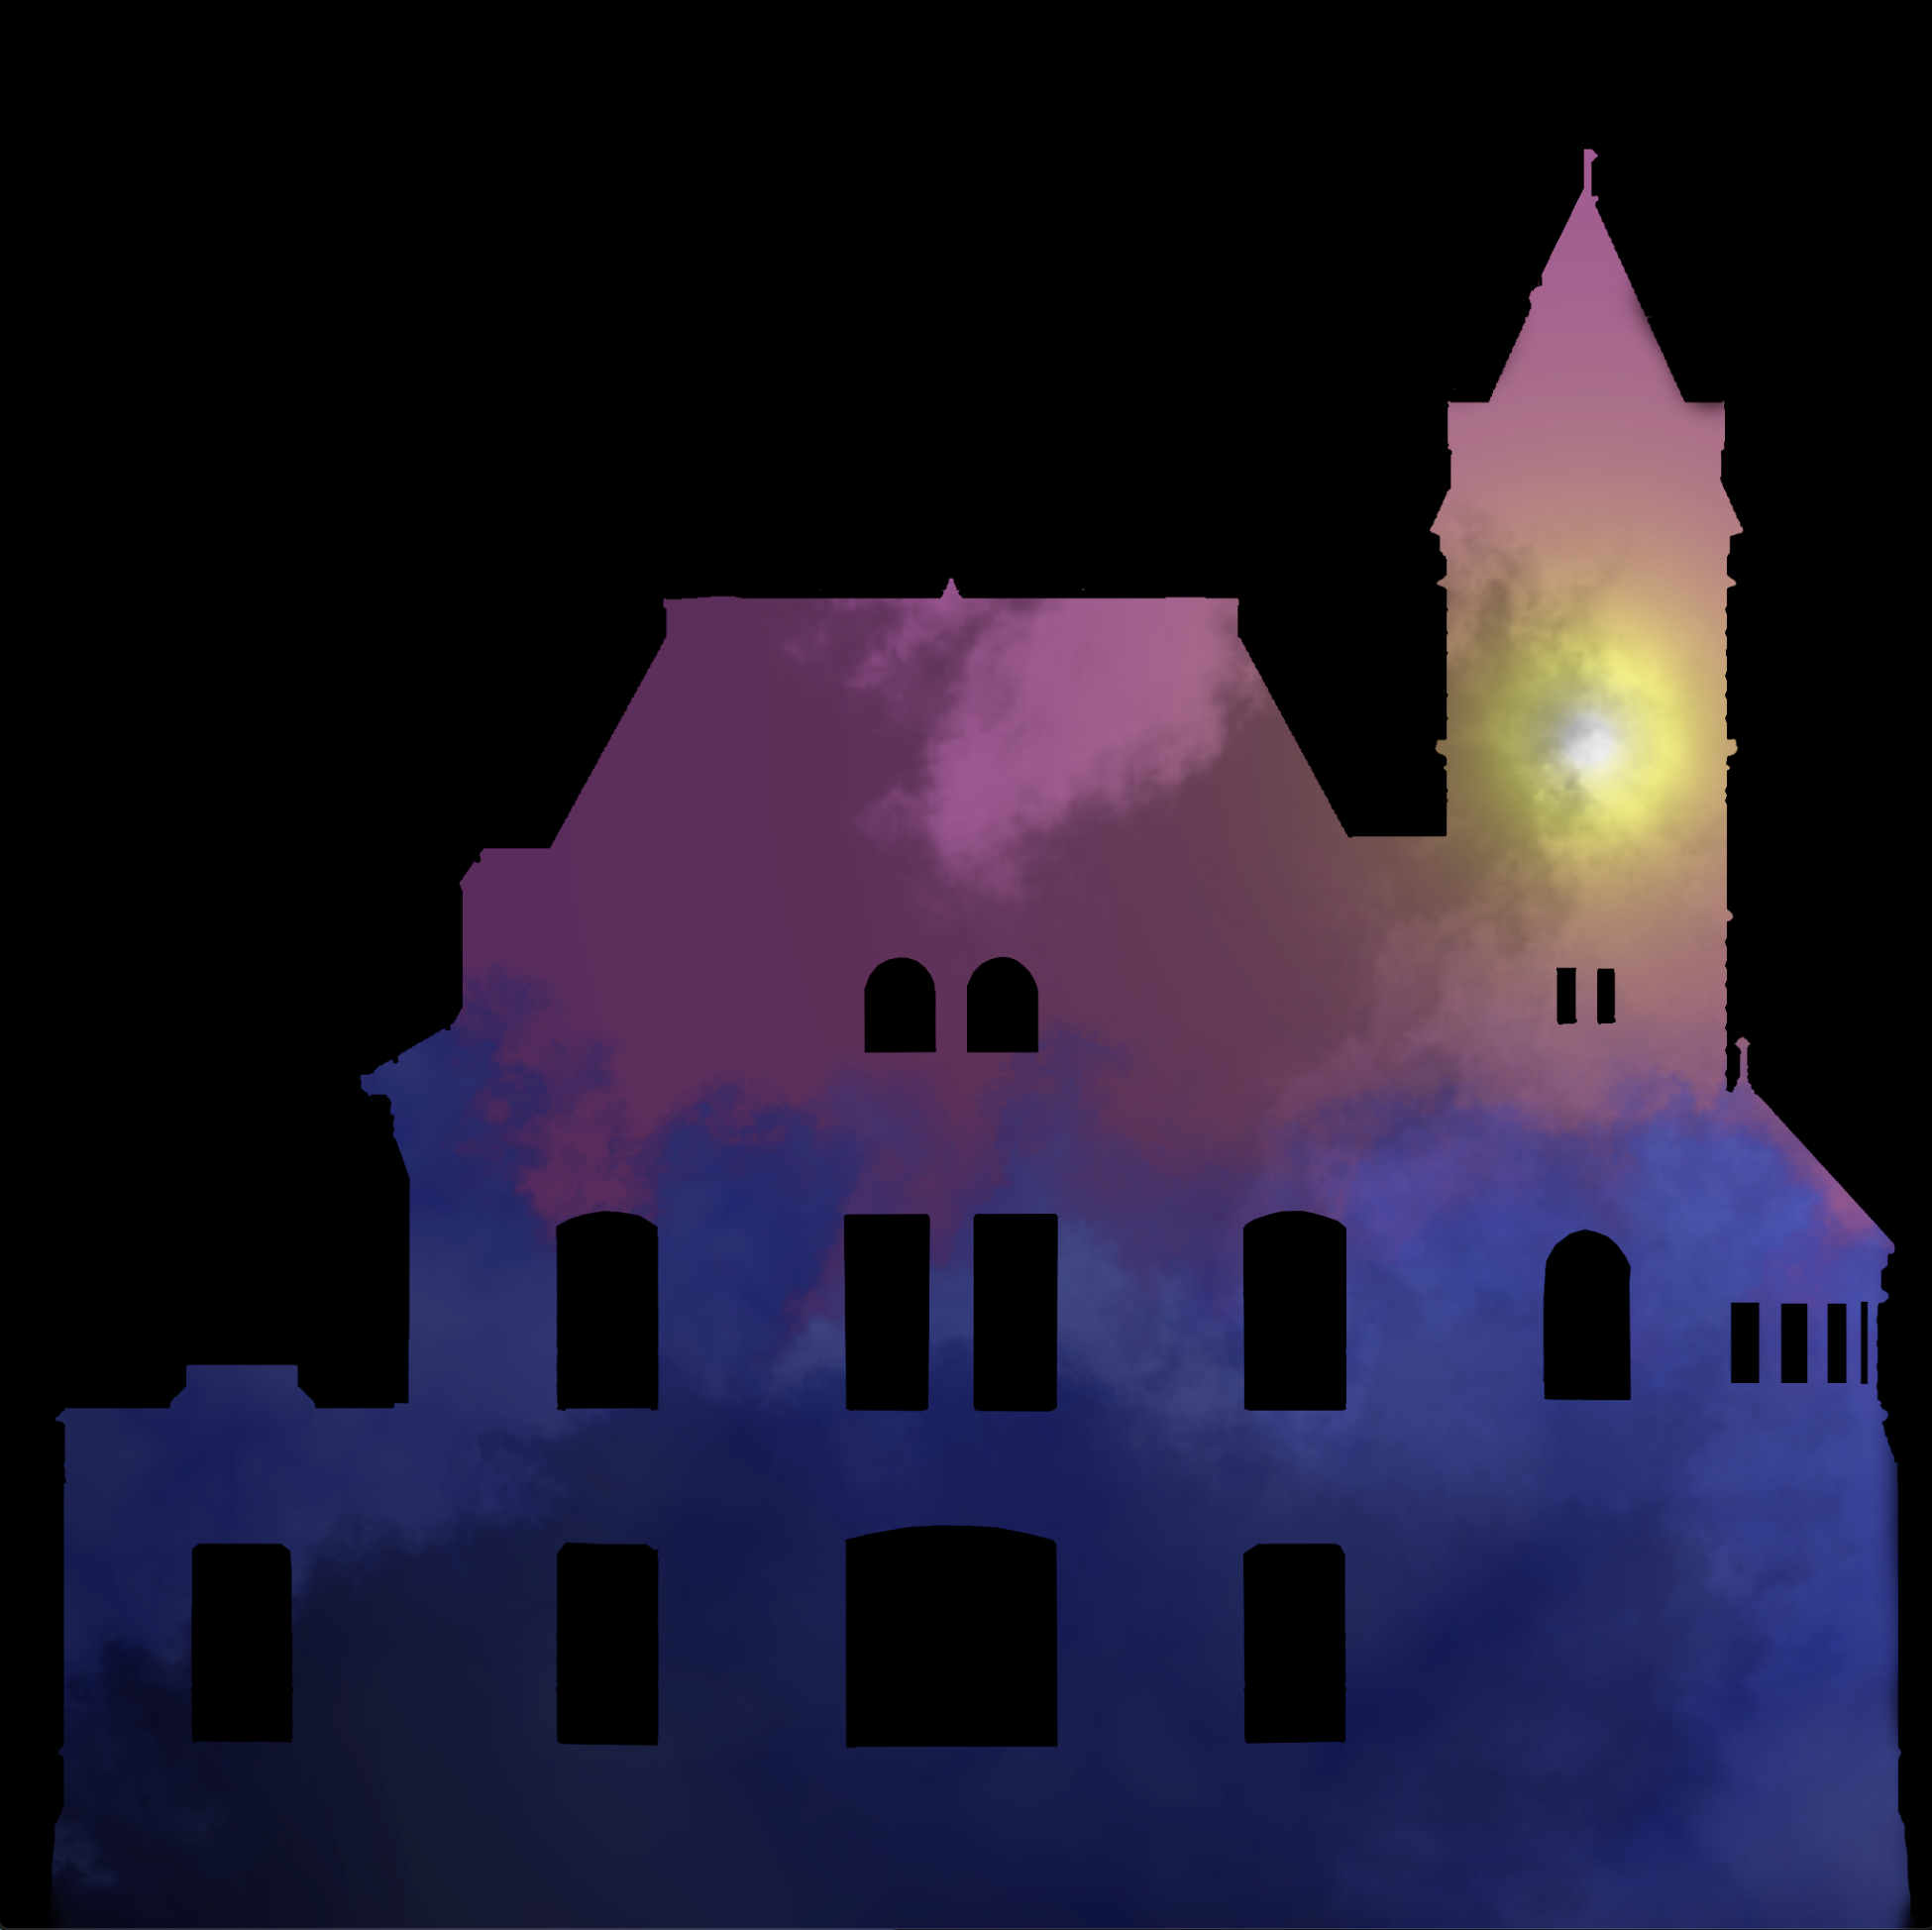 pink anf purple cloudy sky in church style building outline